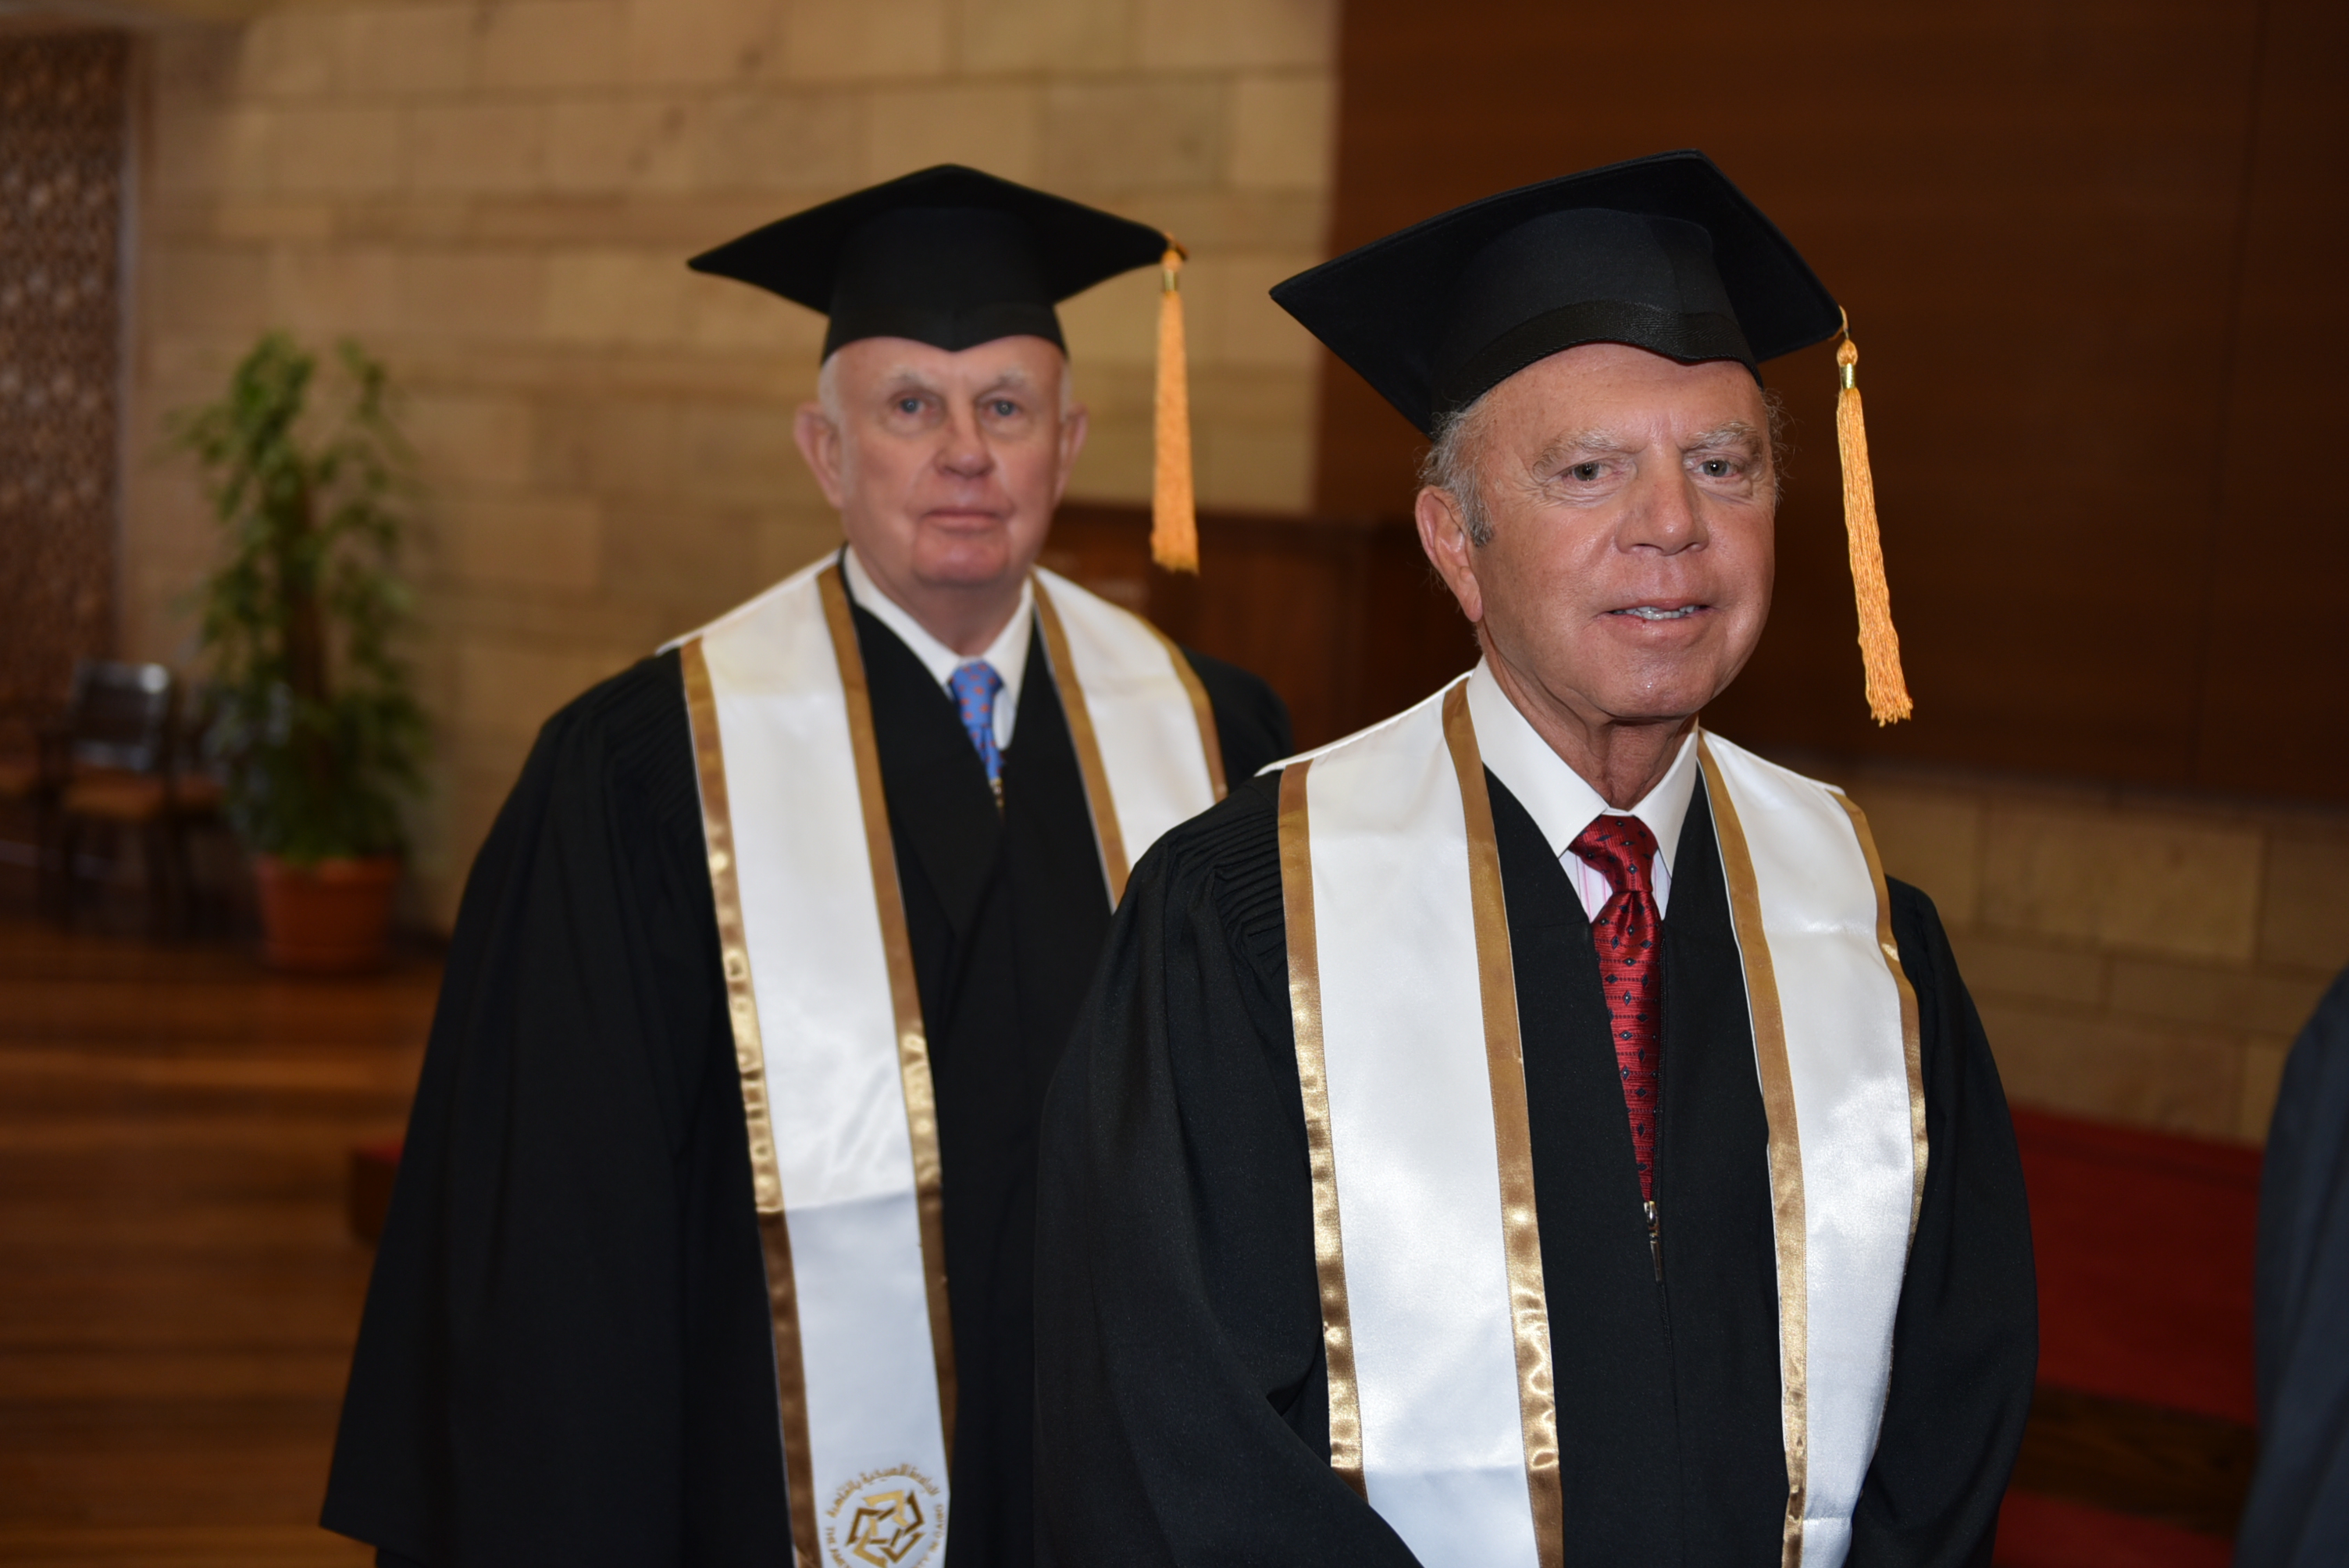 Hannon (left) receives honorary doctorate from AUC